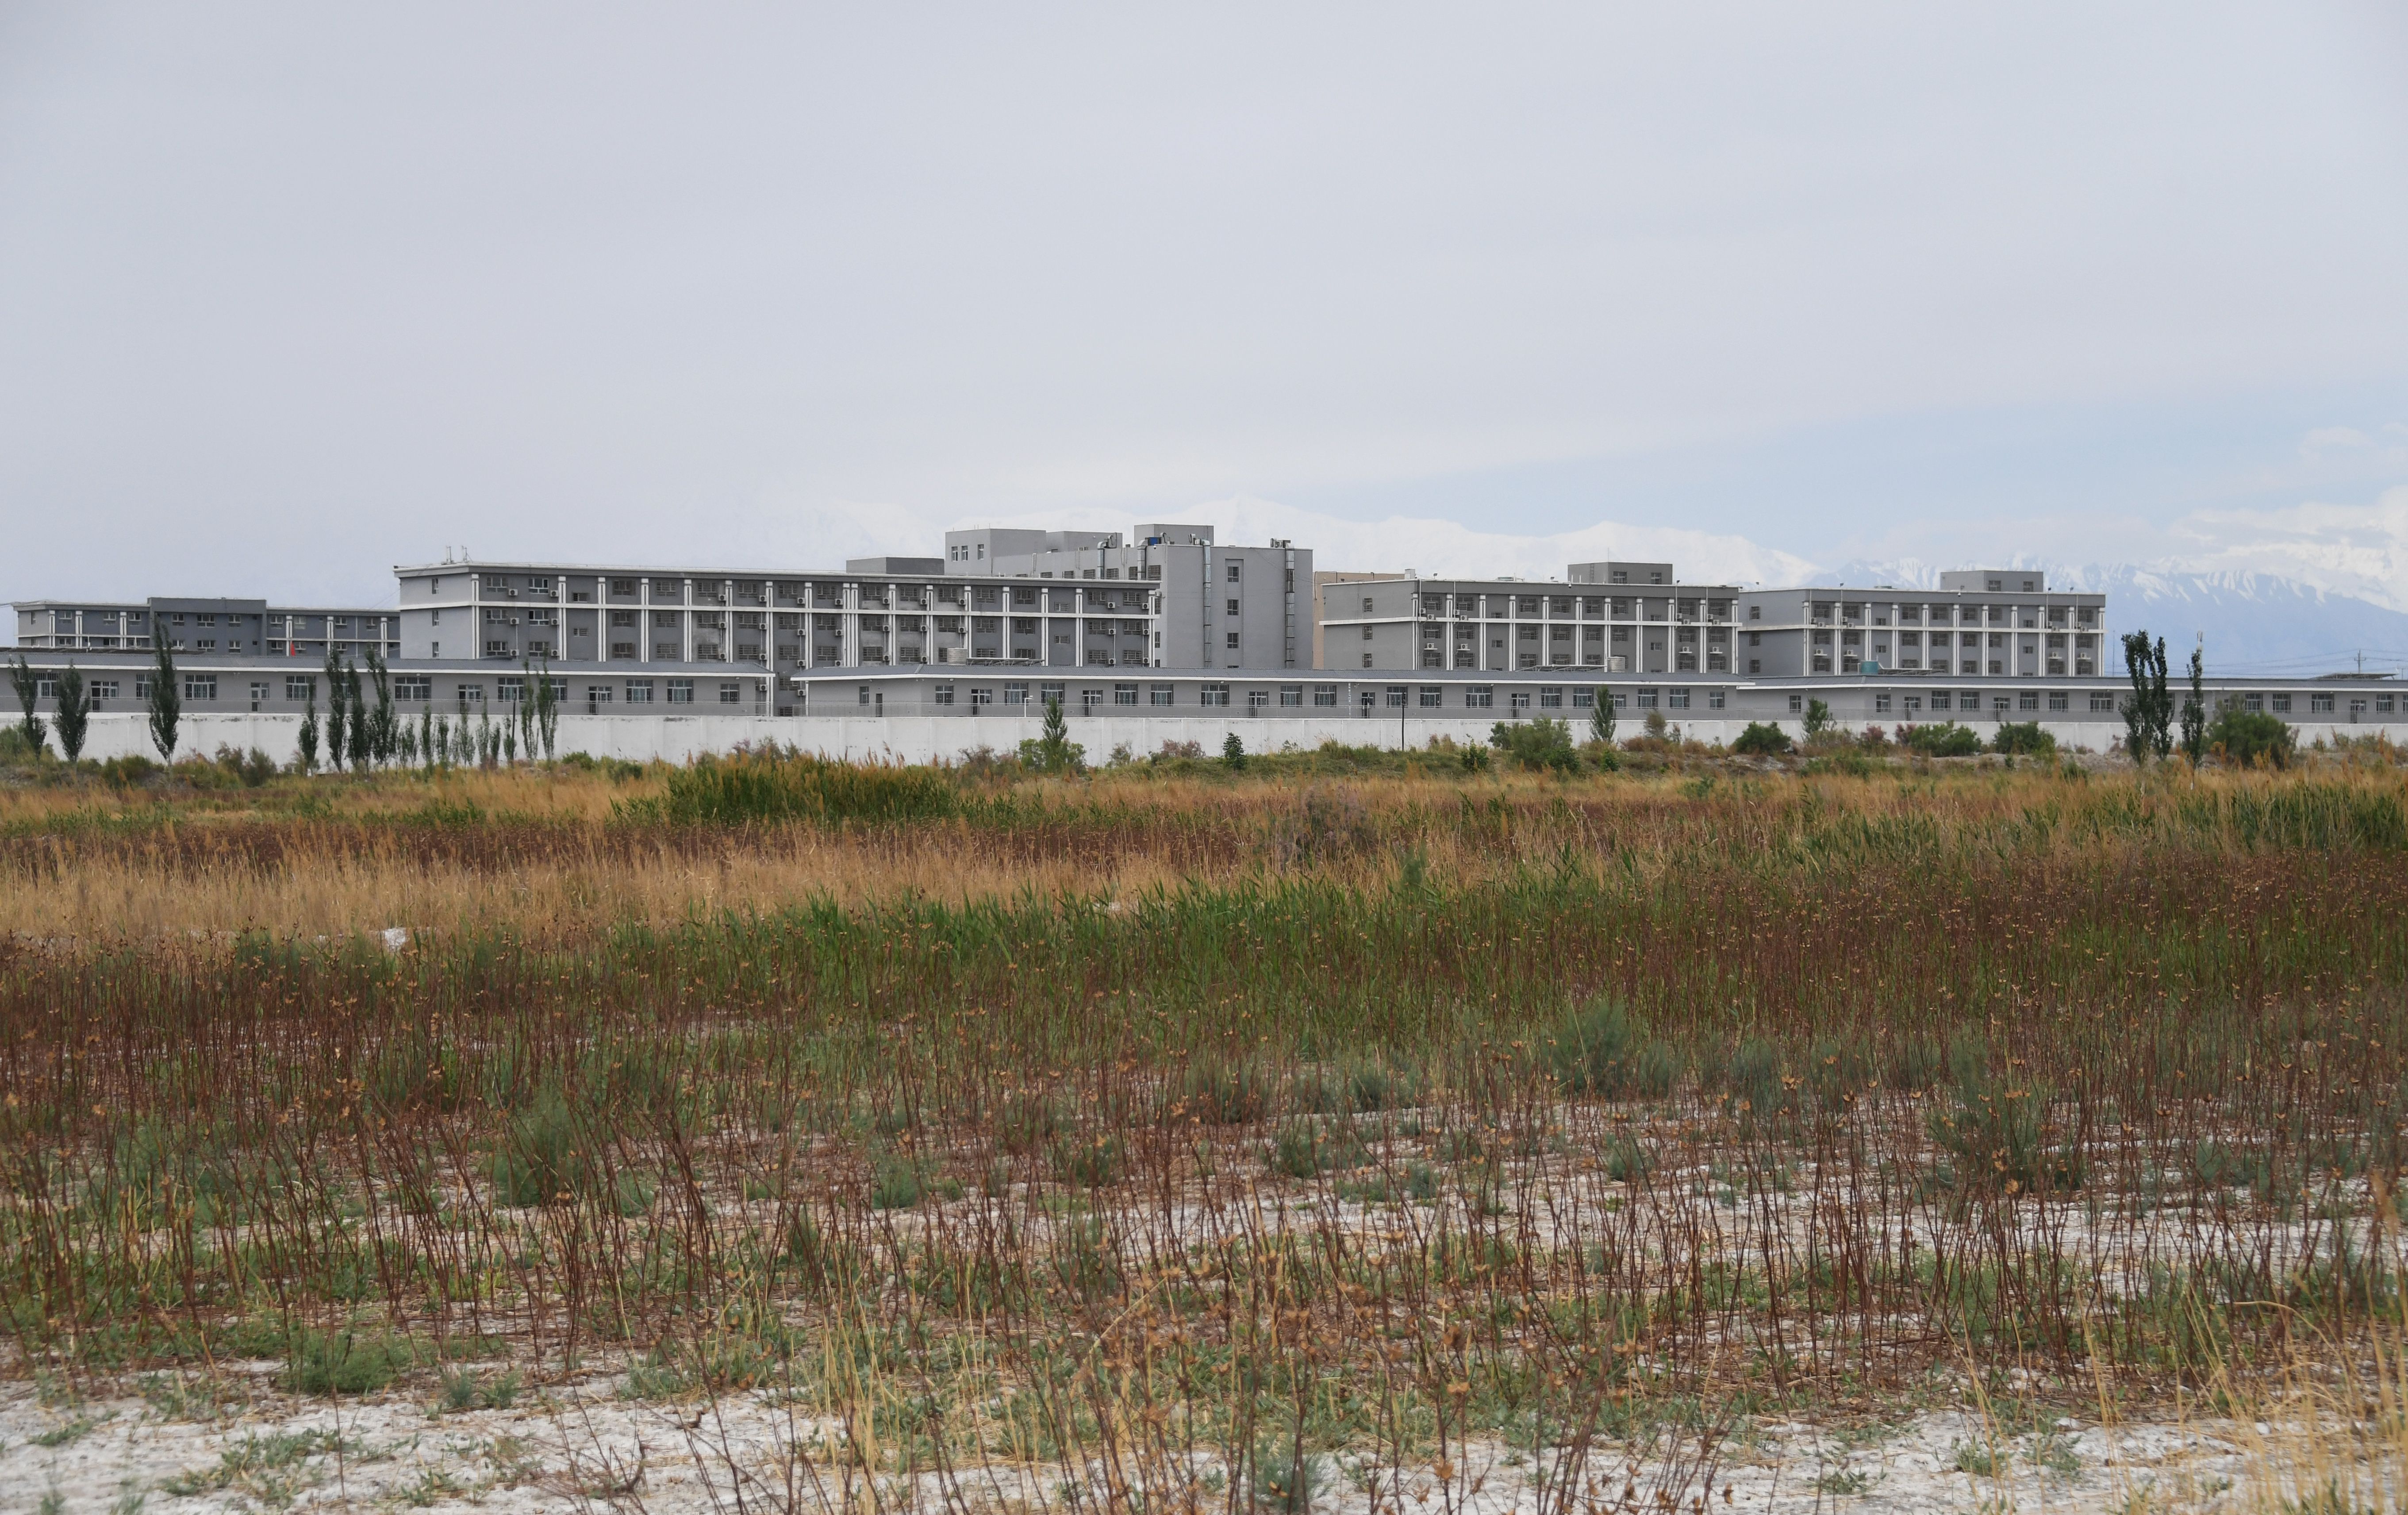 This photo taken on June 4, 2019 shows a facility believed to be a re-education camp where mostly Muslim ethnic minorities are detained. (GREG BAKER/AFP via Getty Images)